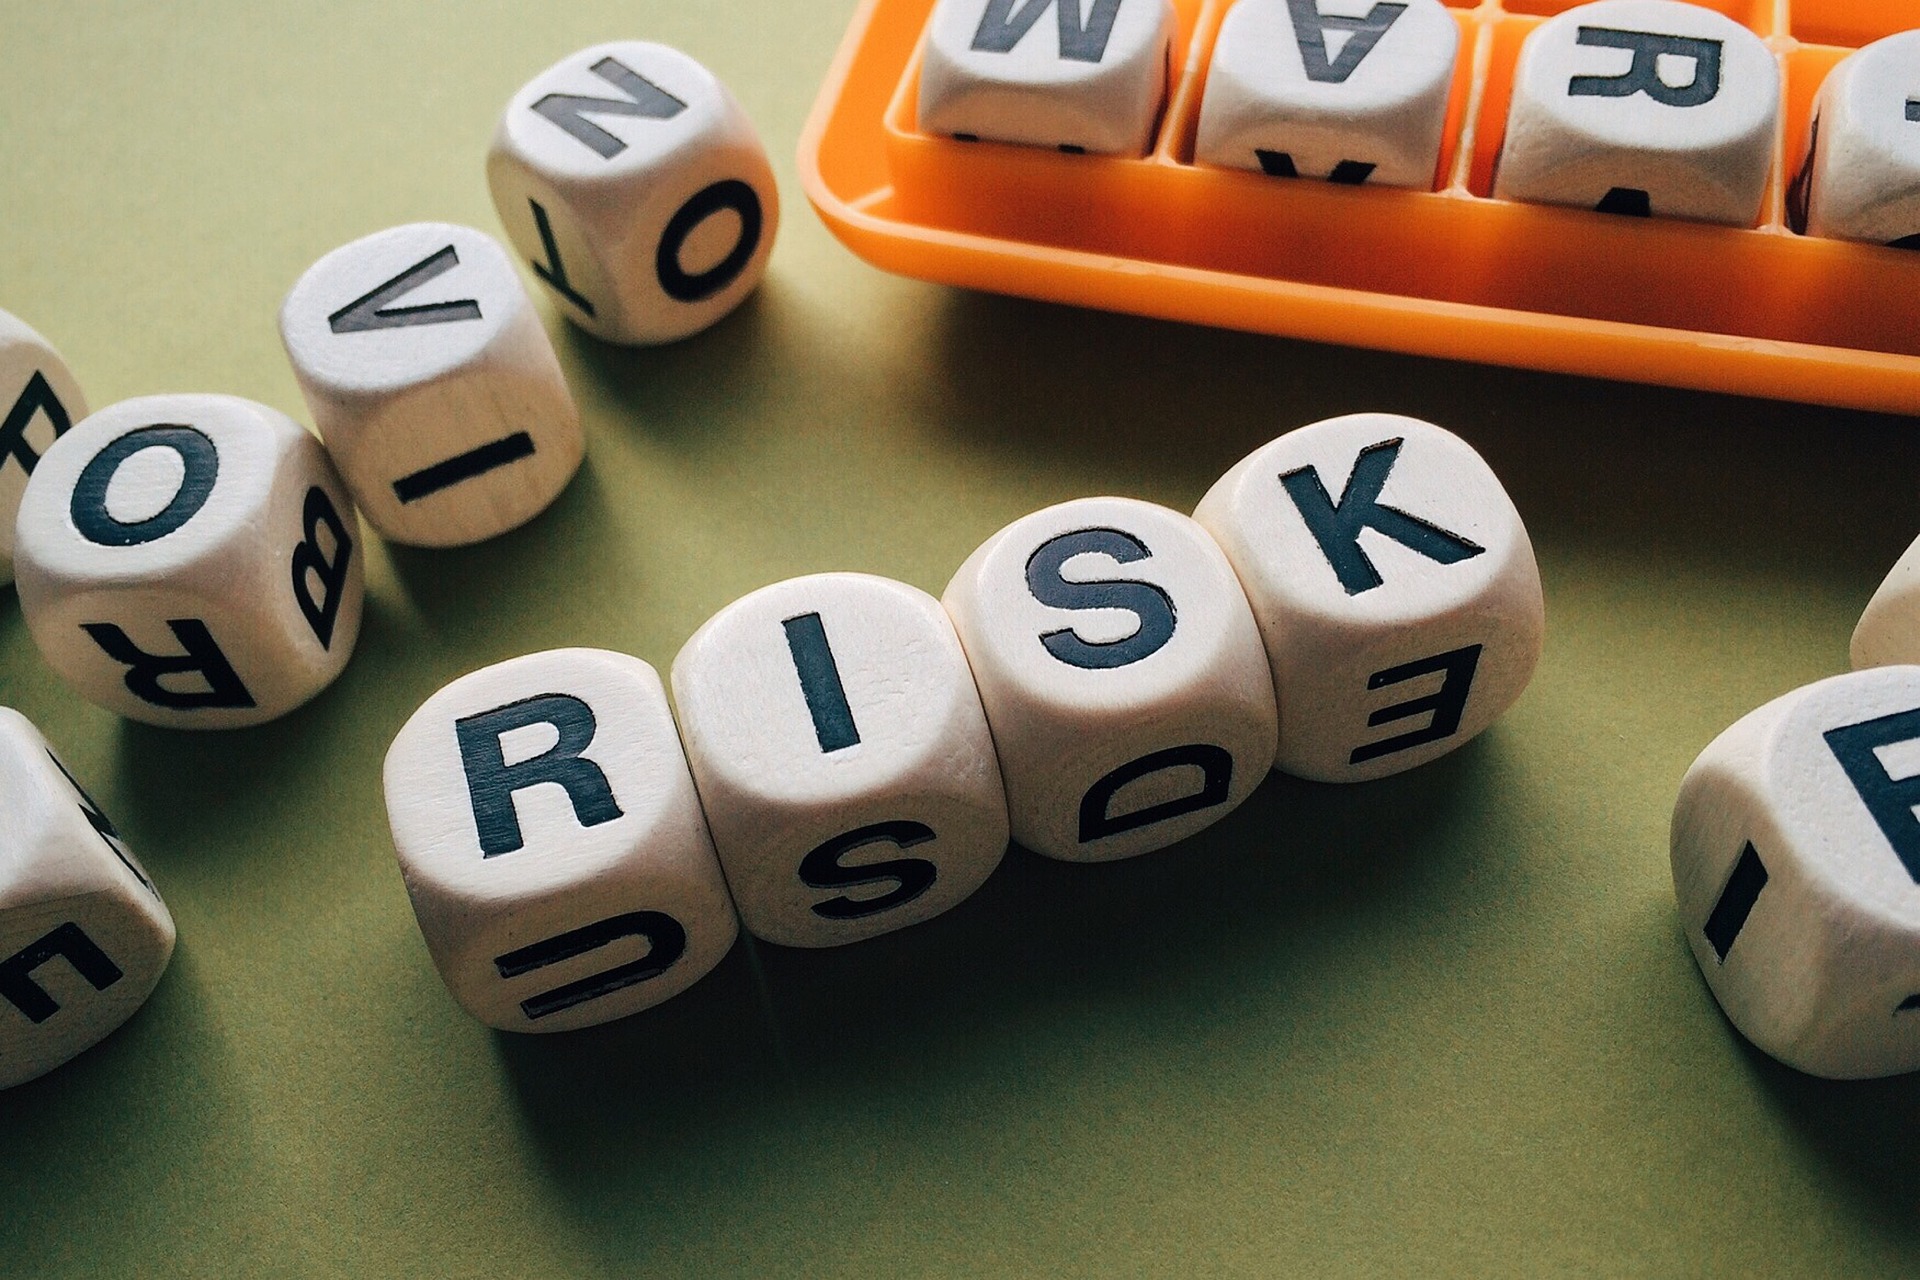 The management of risk